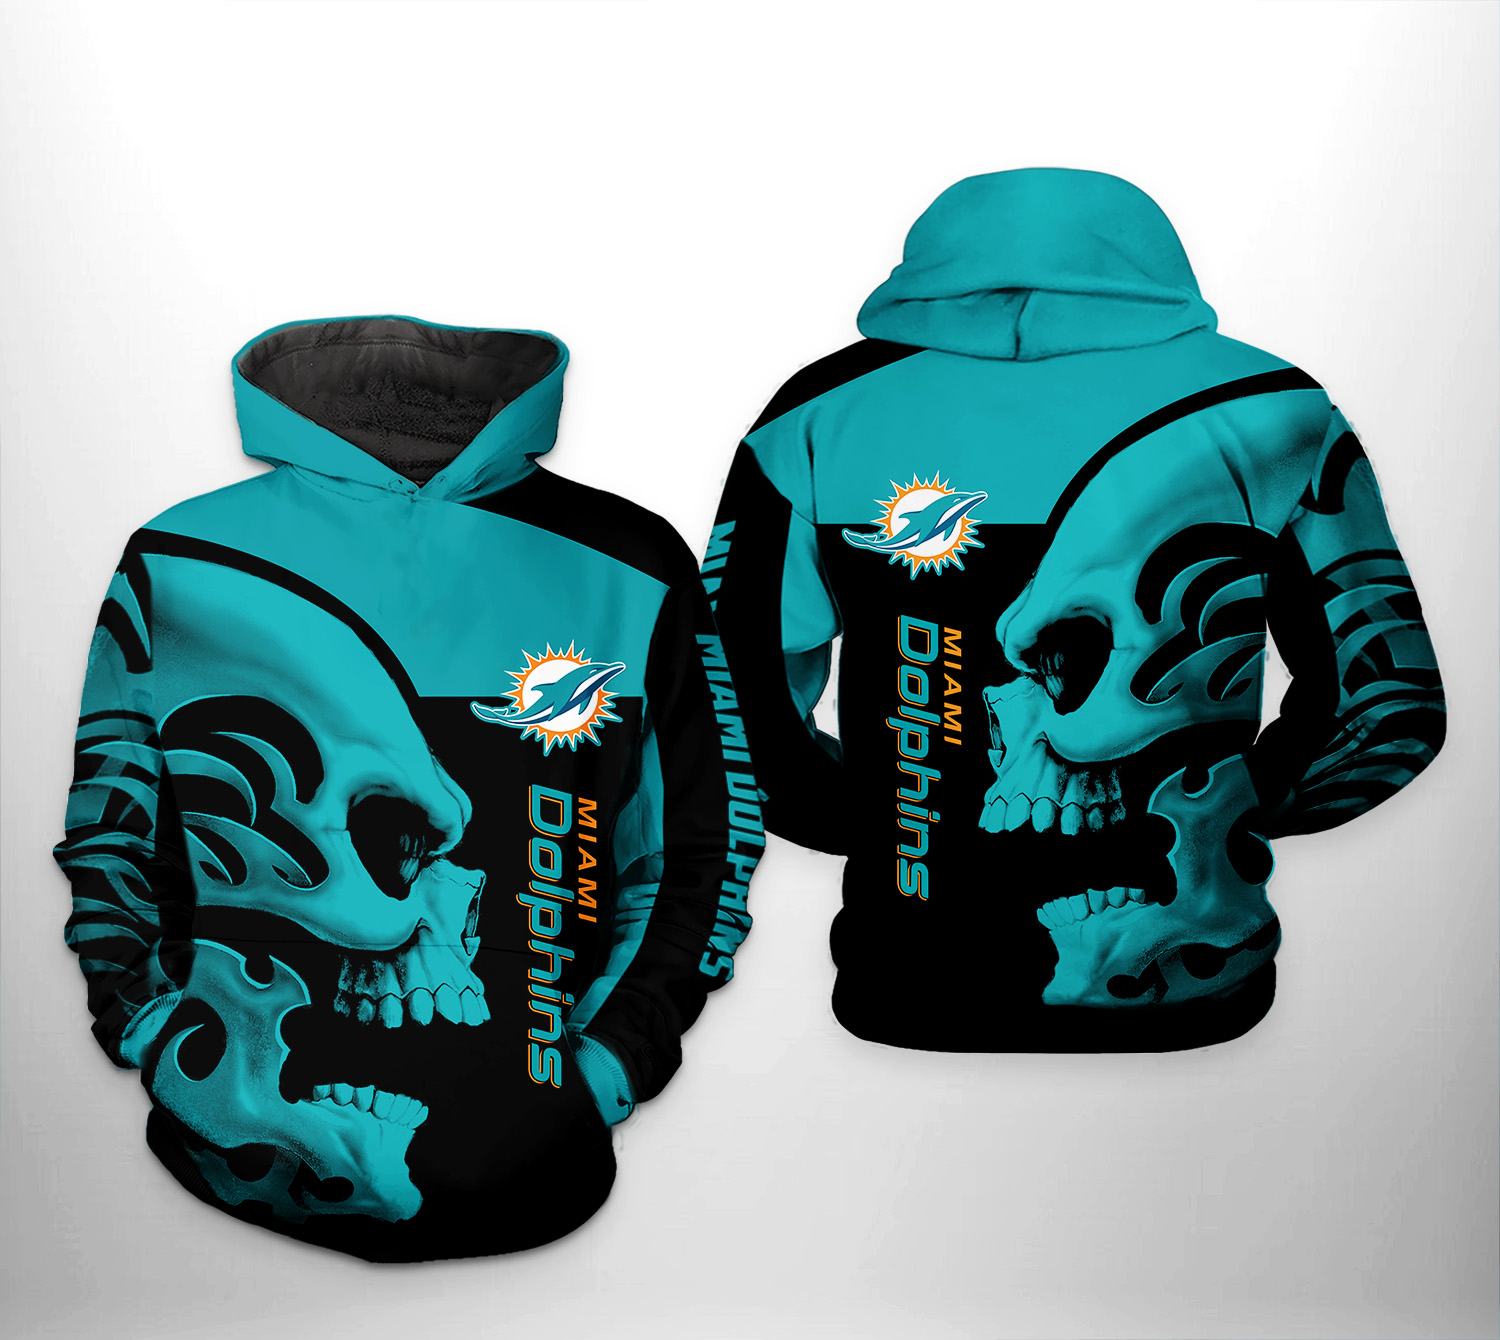 Miami Dolphins Shop - Miami Dolphins NFL Skull 3D Printed HoodieZipper Hoodie